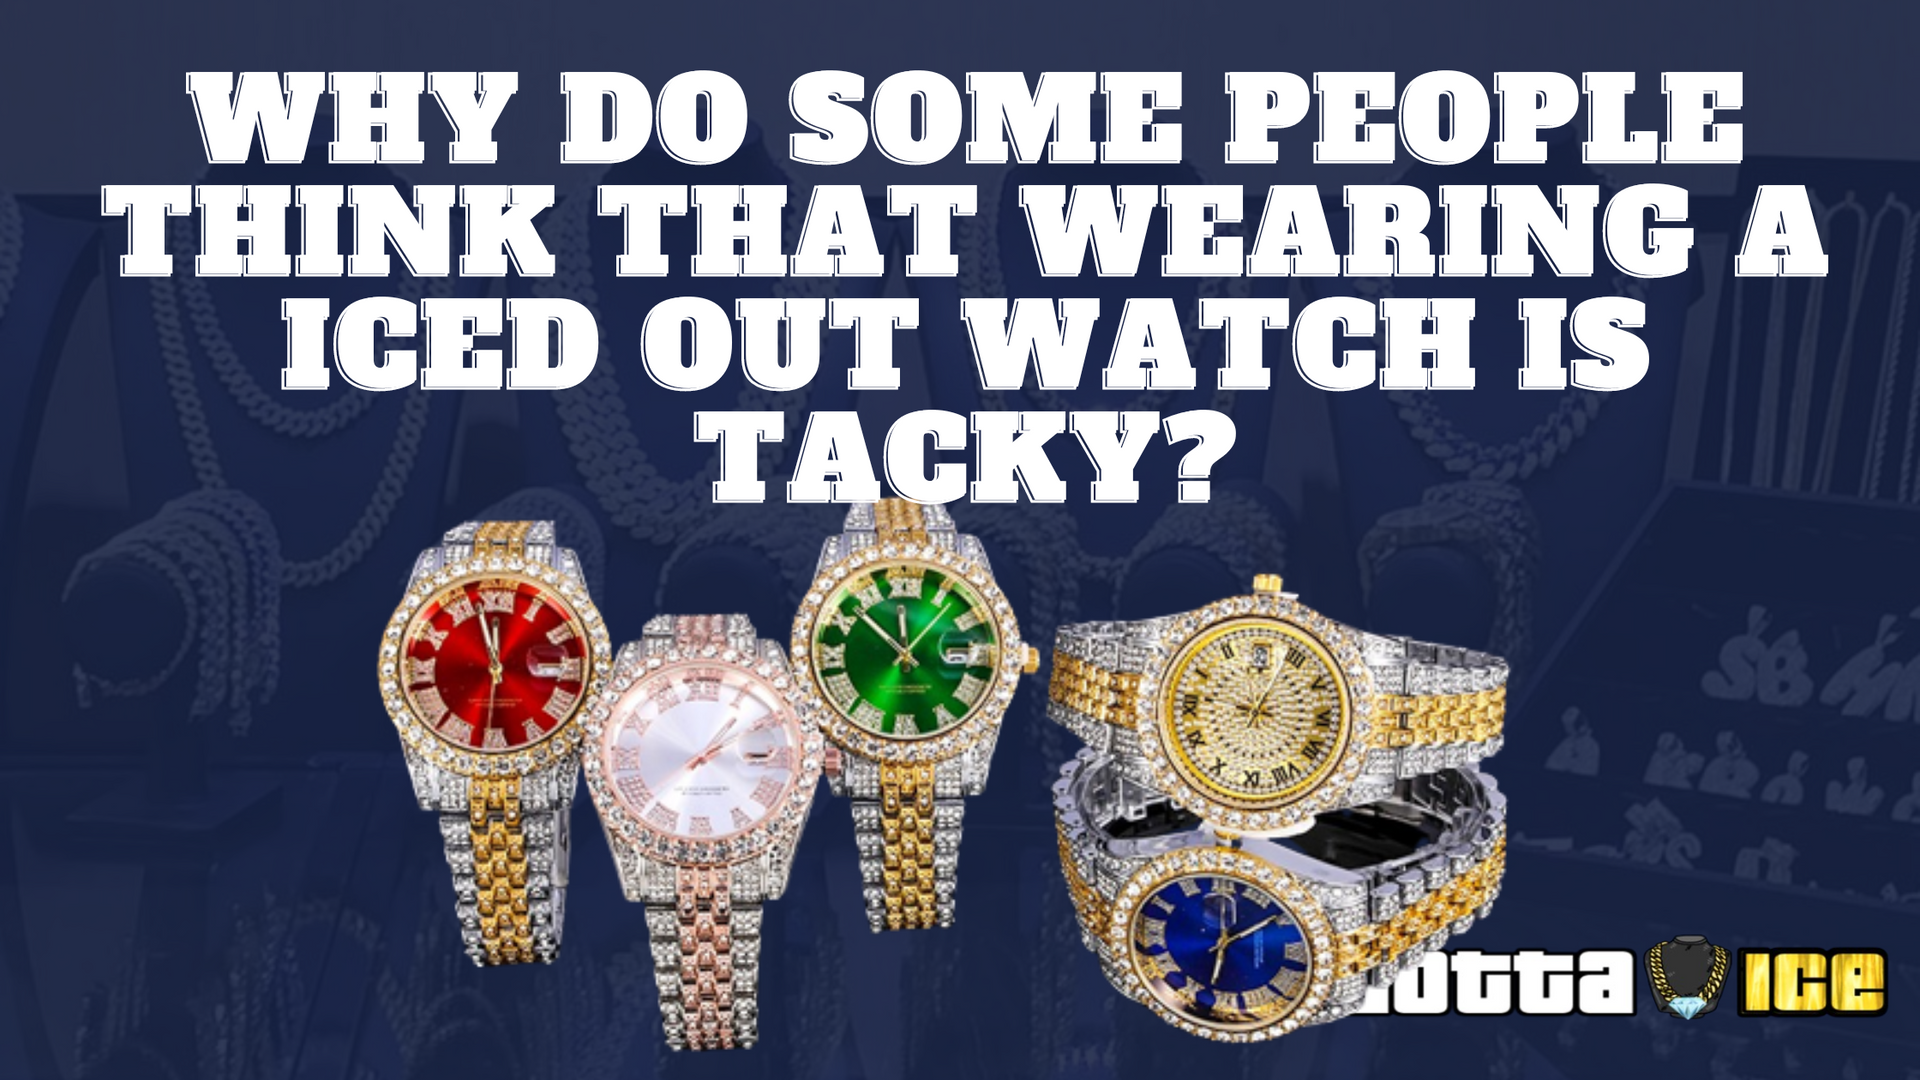 Why do some people think that wearing a iced out watch is tacky? | GottaIce